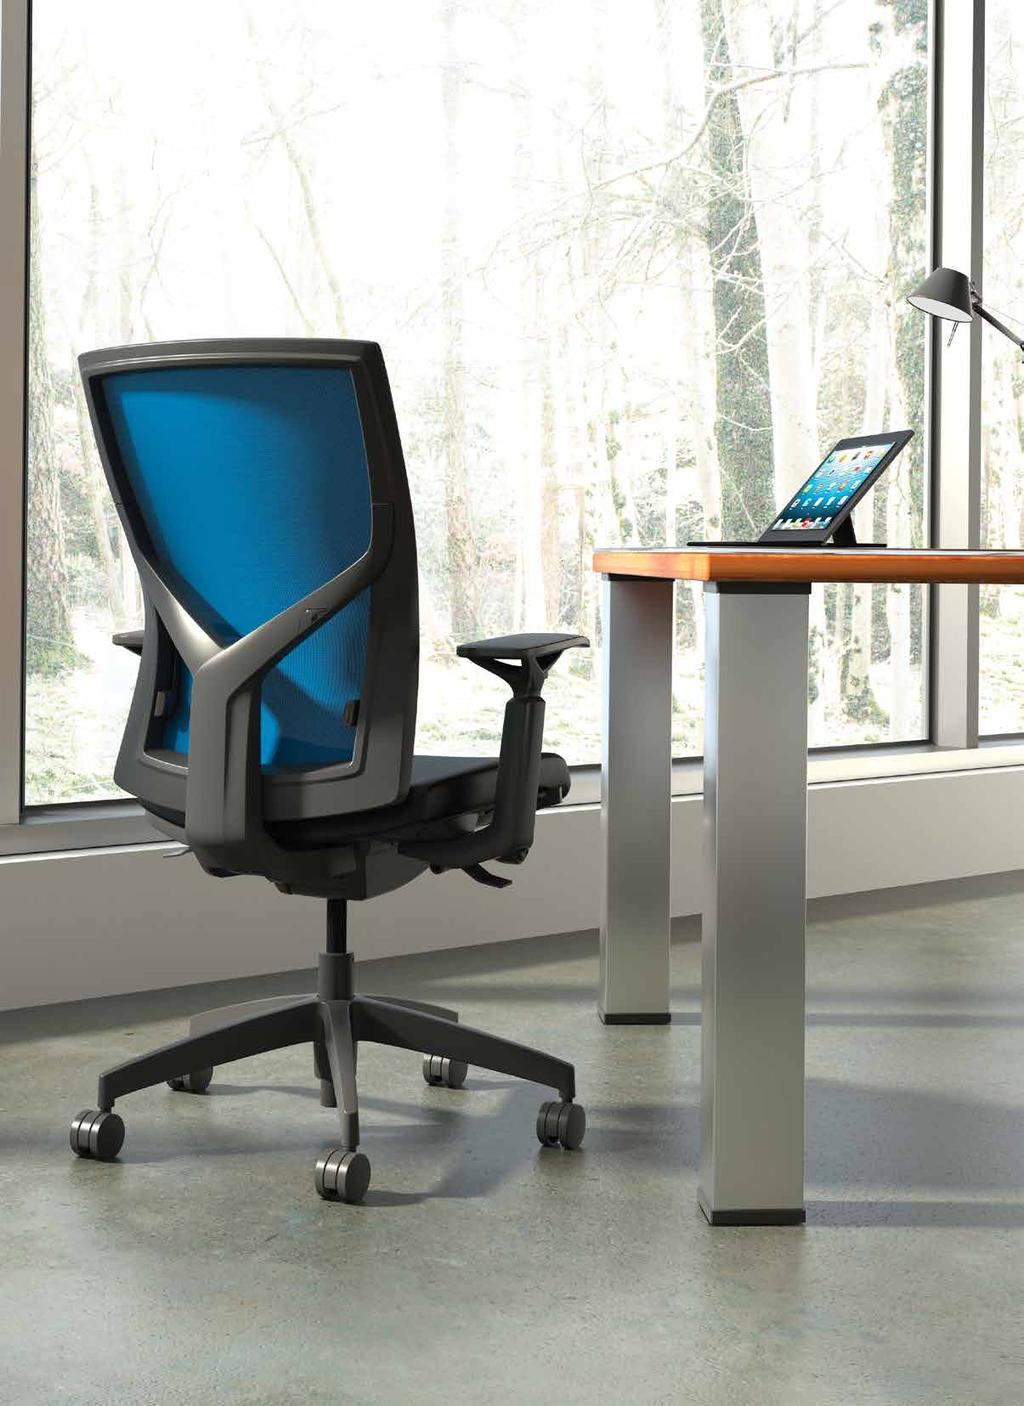 for the office Inspirational design and cable-driven control coupled with adjustable lumbar support and seat depth adjustment make Torsa a superb choice